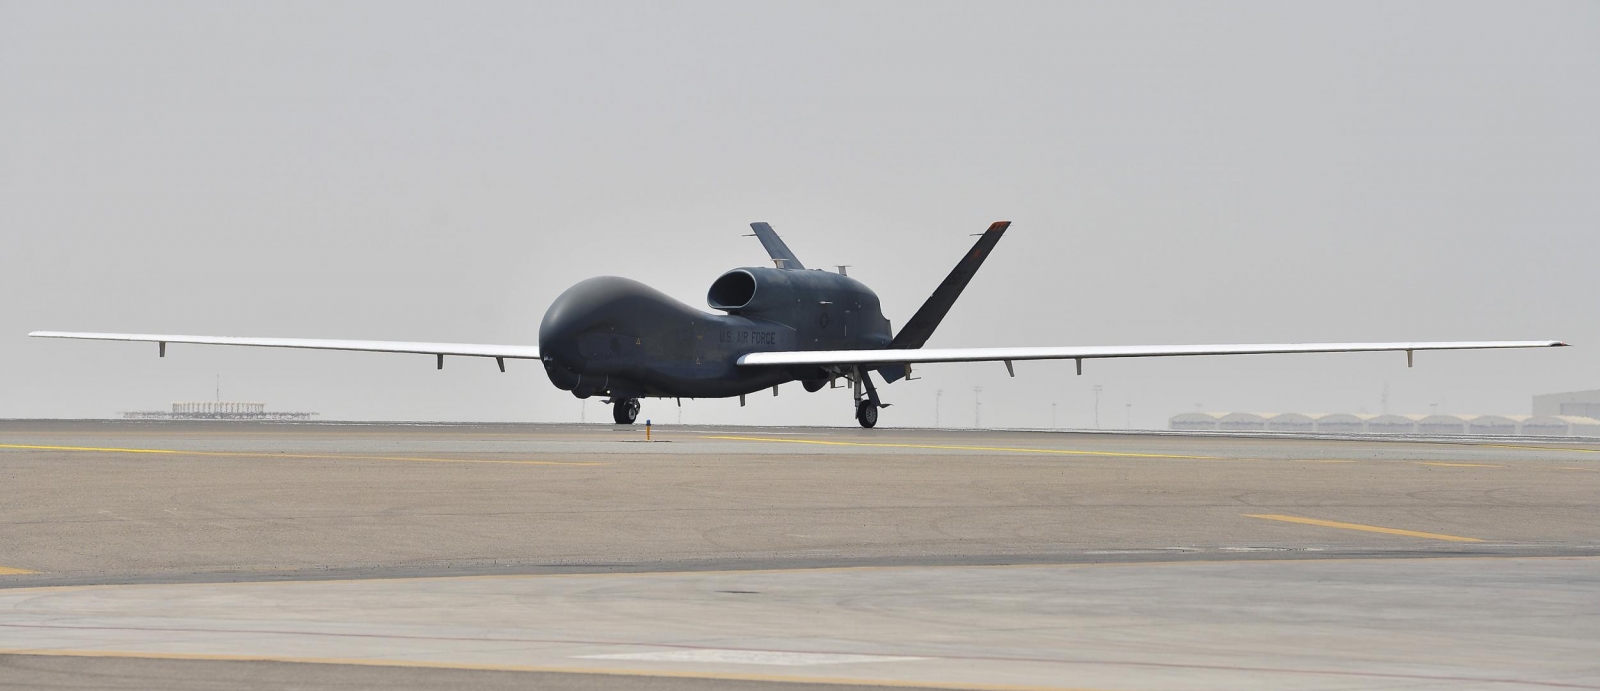 The Global Hawk remotely piloted aircraft is an example of an Air Force ISR asset that is evaluated by the ISR Systems & Architectures Group to understand existing capabilities and future needs.